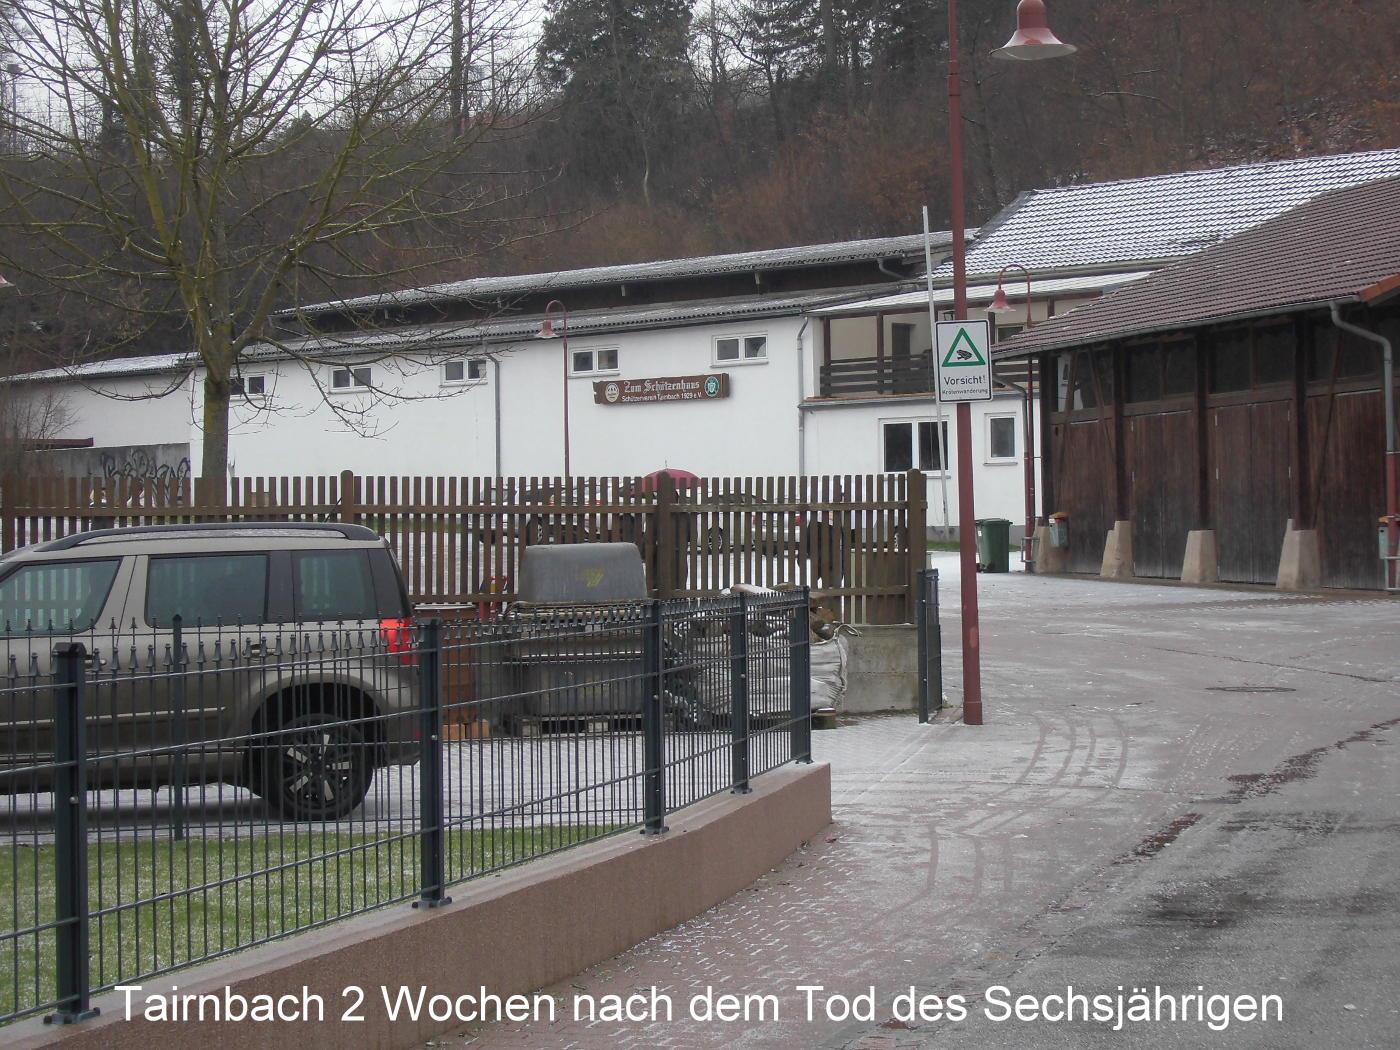 Two weeks after the death of the six-year-old in Walldorf